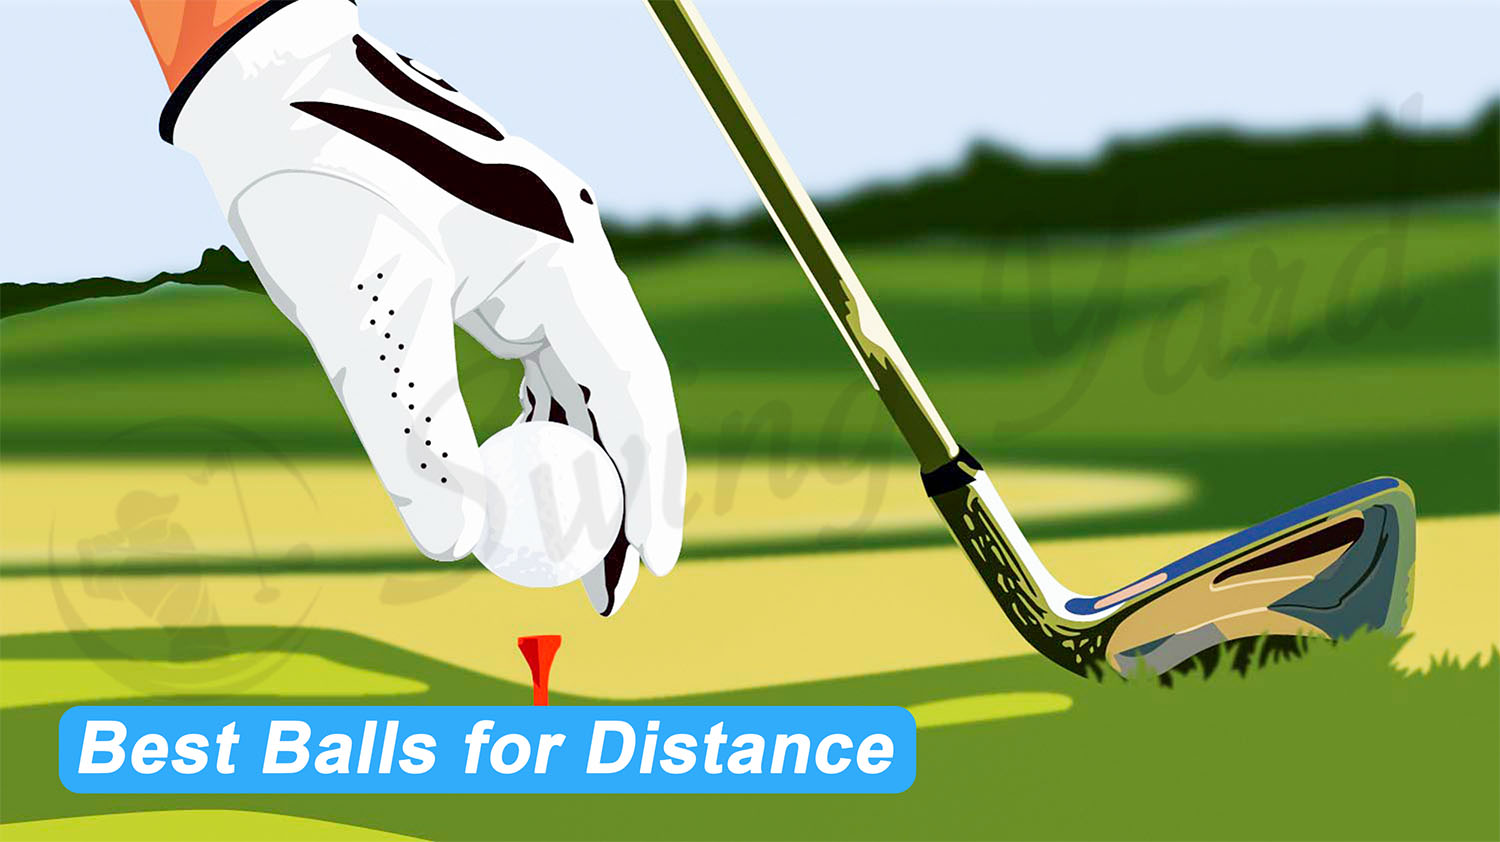 Setting up a golf ball for distance